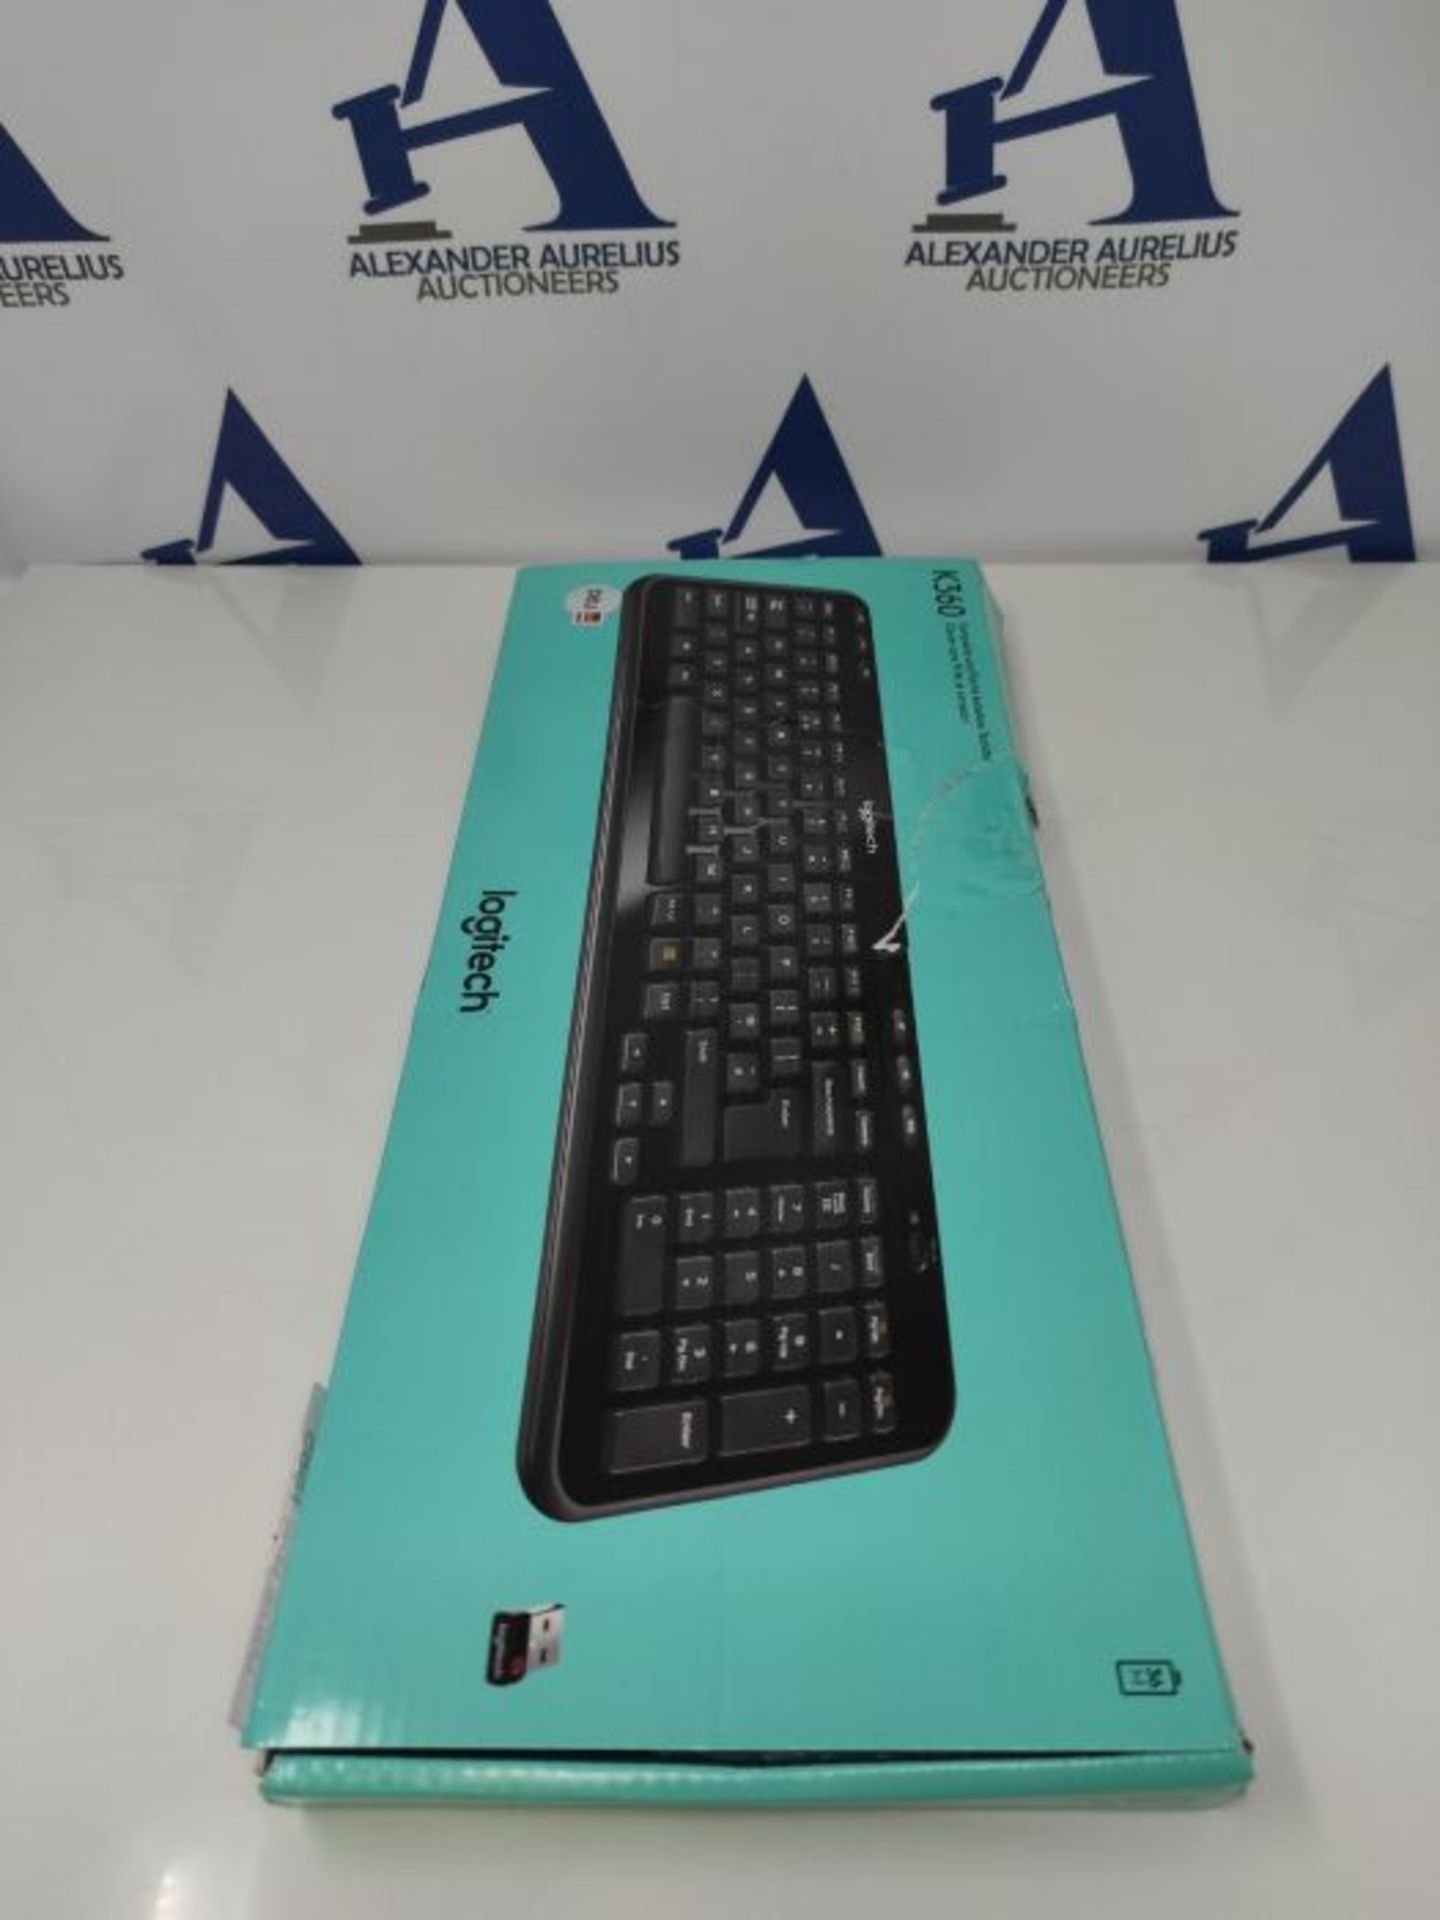 [INCOMPLETE] Logitech K360 Compact Wireless Keyboard for Windows, QWERTZ German Layout - Image 2 of 3